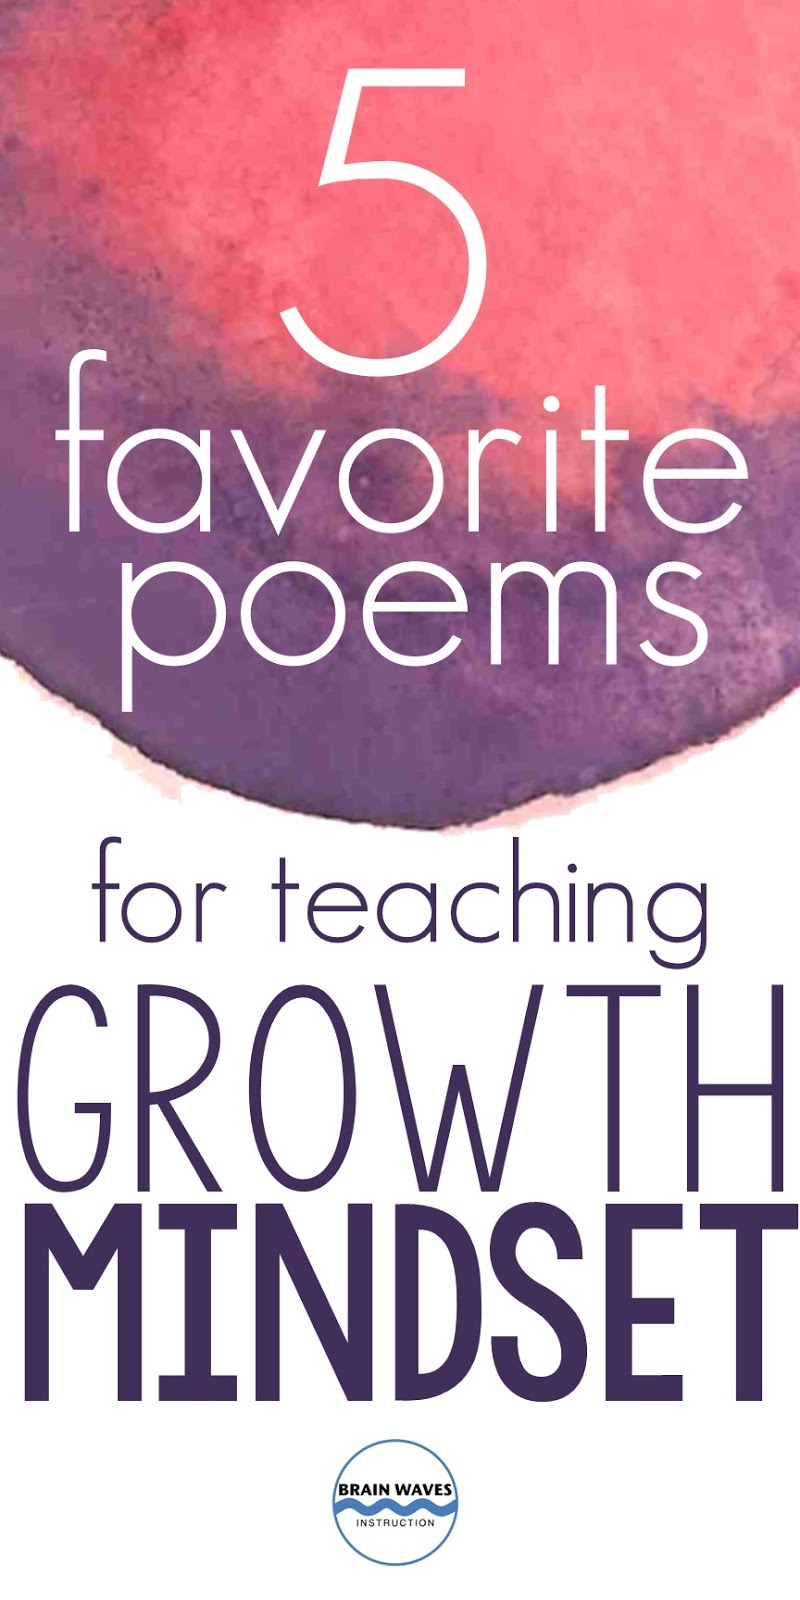 Brain Waves Instruction: 5 Favorite Poems to Teach Growth Mindset